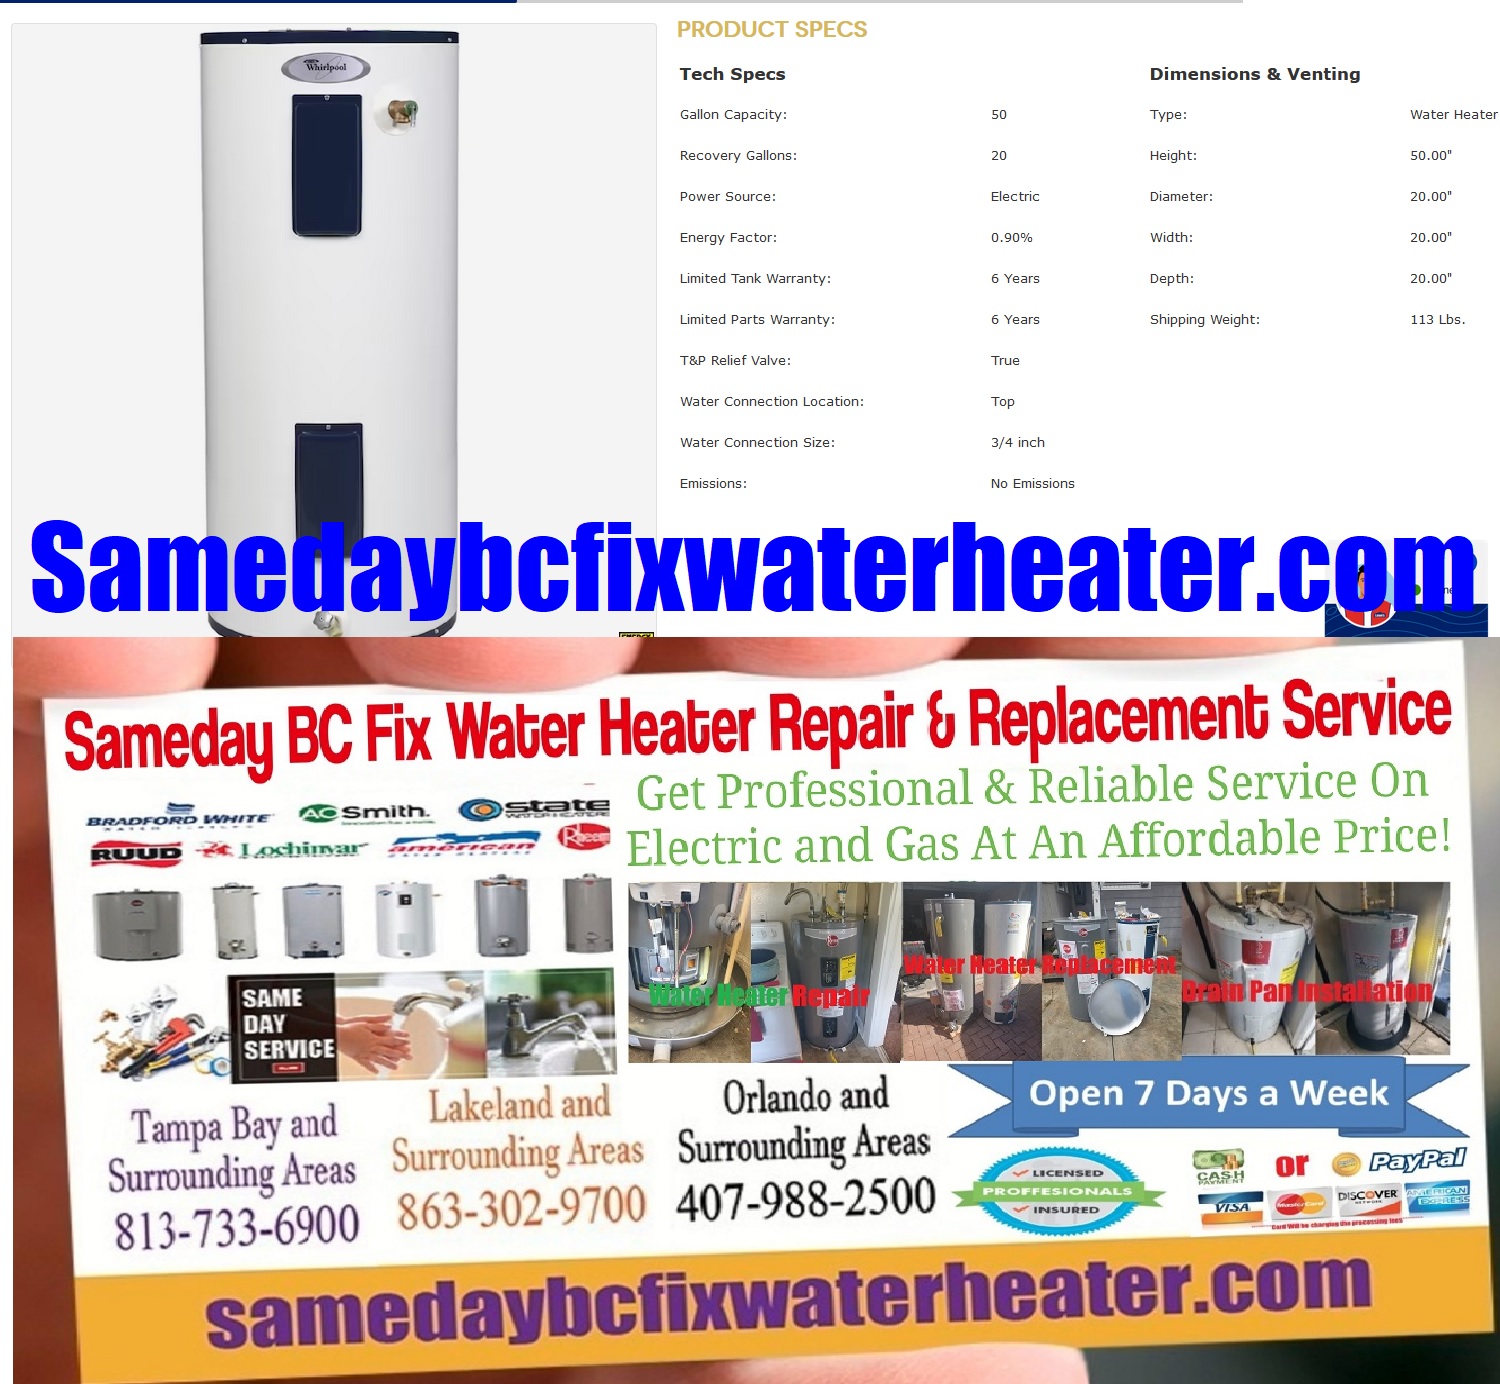 Whirlpool E1F50RD045V 50 Gallon Electric Water Heater Overview, Repair, Replacement, Installation and maintenance Service